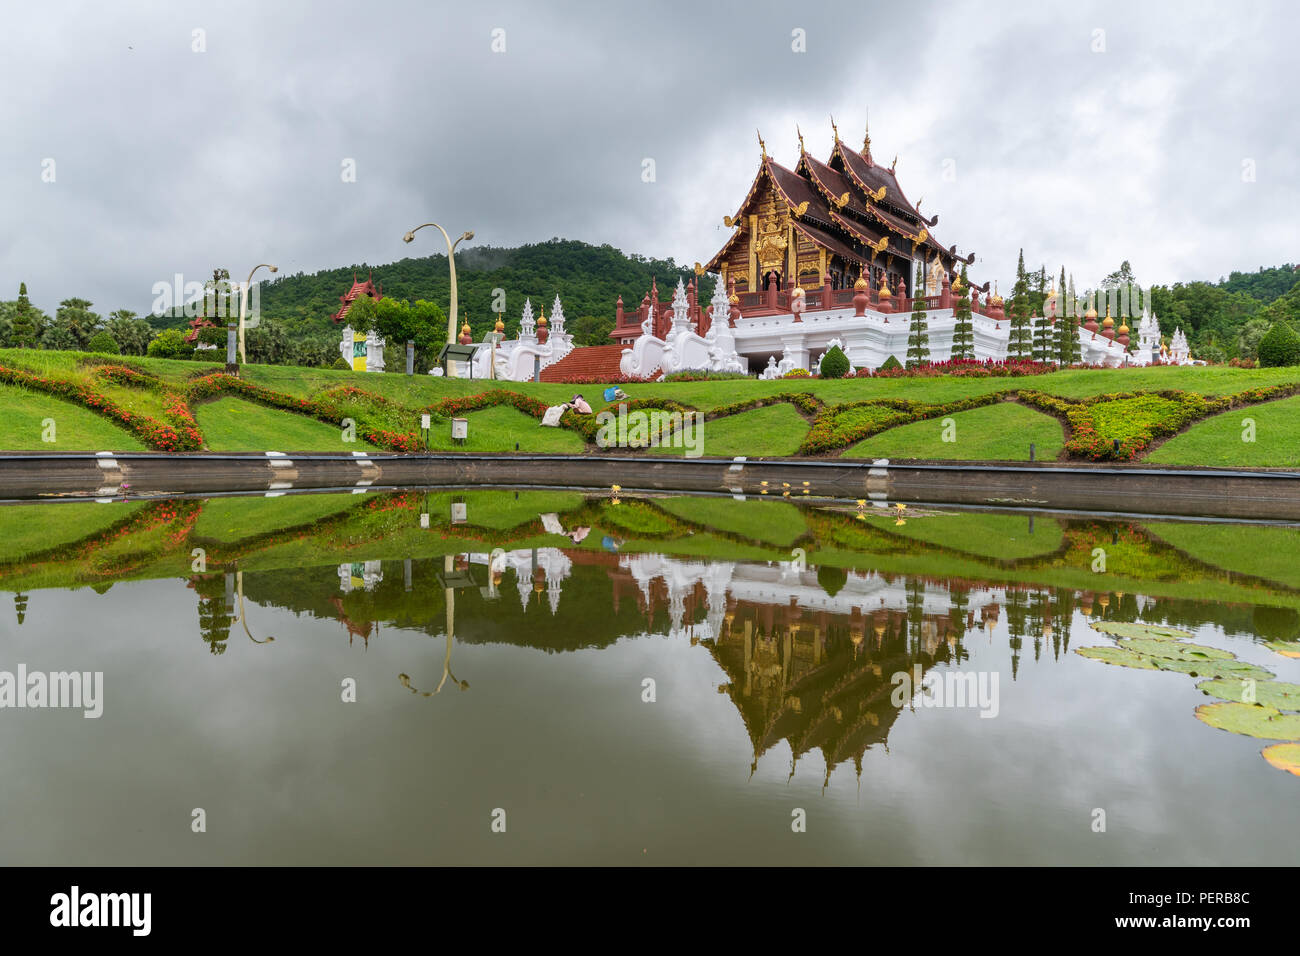 Chiangmai, Thailand - June, 27, 2018: Beautiful ancient style royal pavilion with reflection in swamp in Royal Park Rajapruek, the tourism travel dest Stock Photo